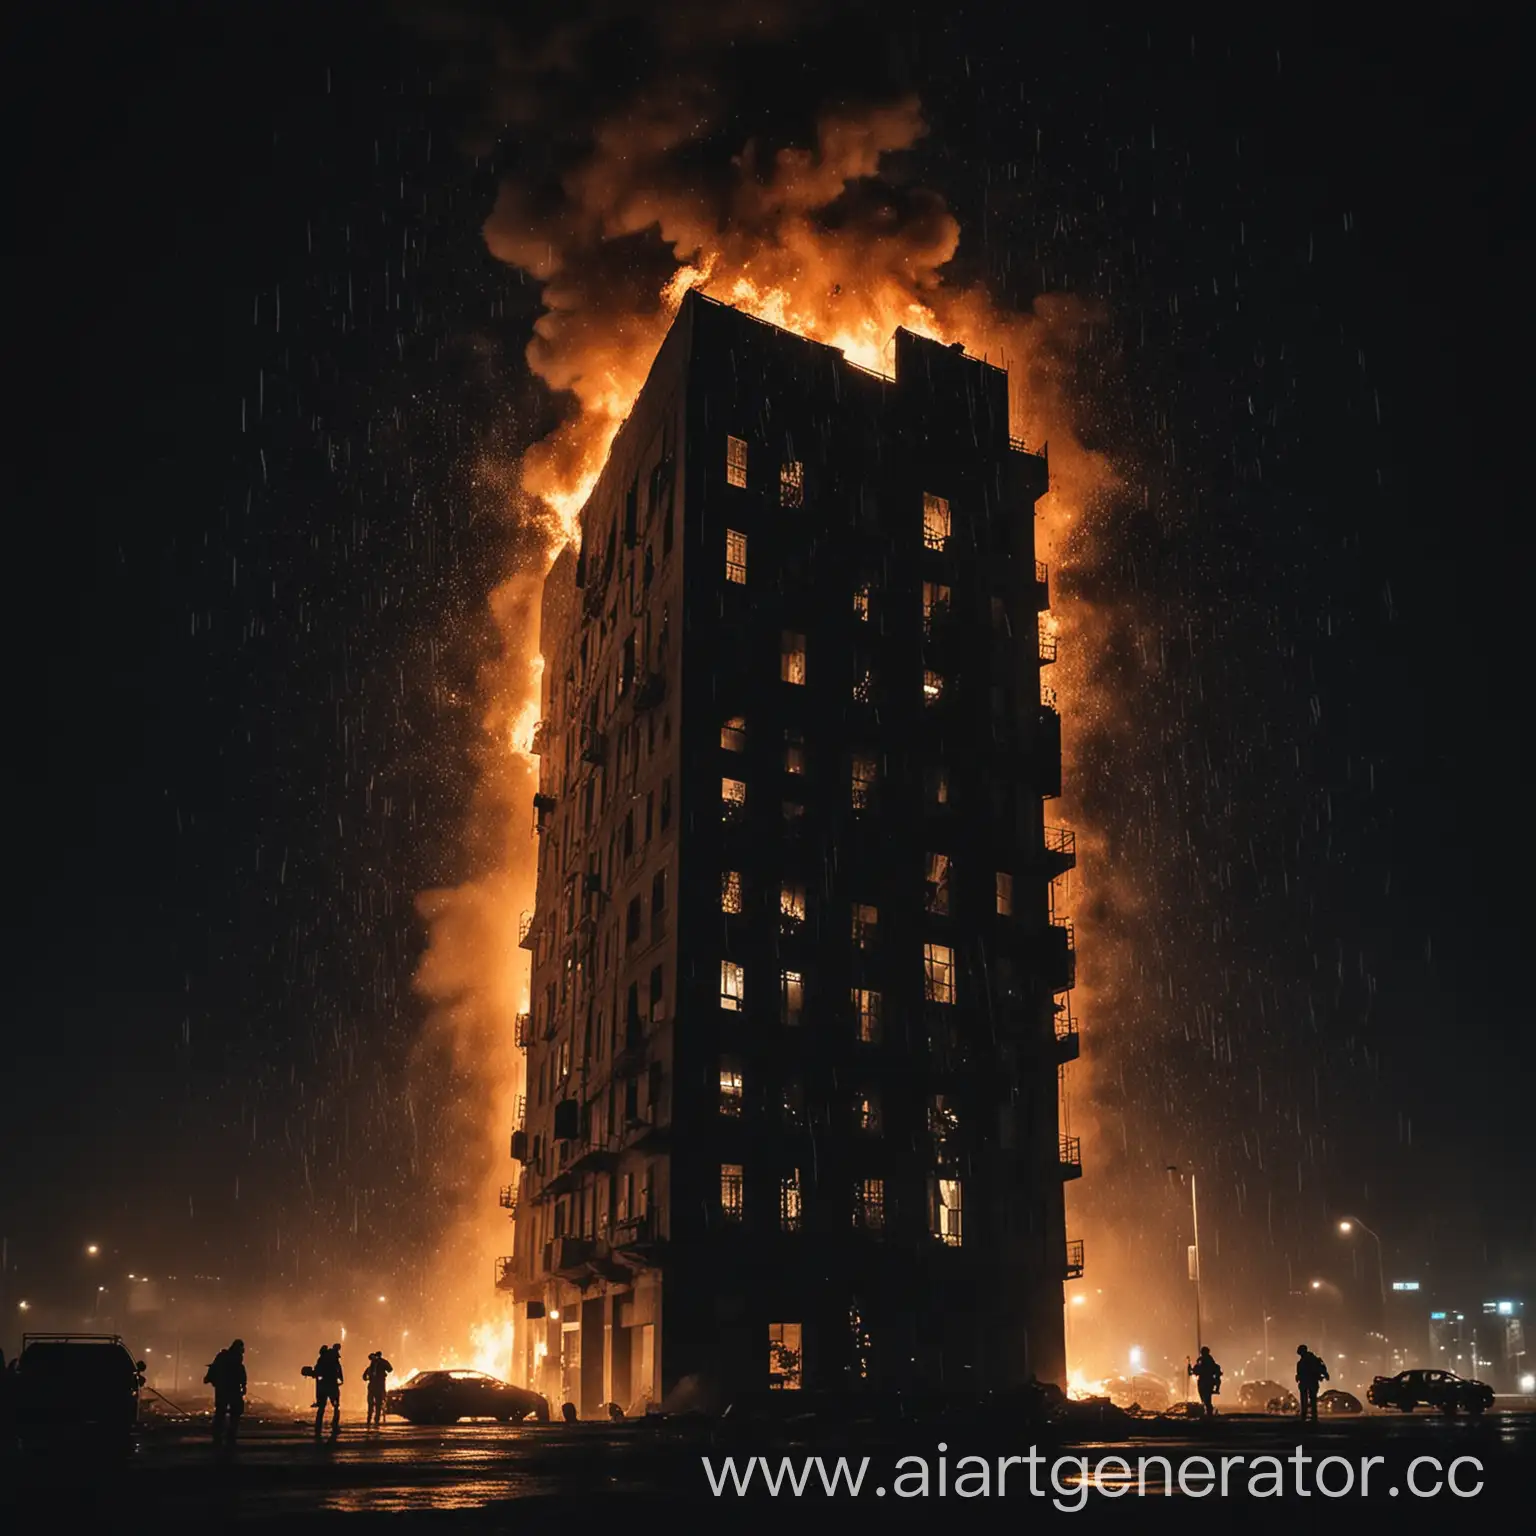 Urban-Fire-Burning-HighRise-Amidst-Rainy-Night-with-Fleeing-Figures-in-Silhouette